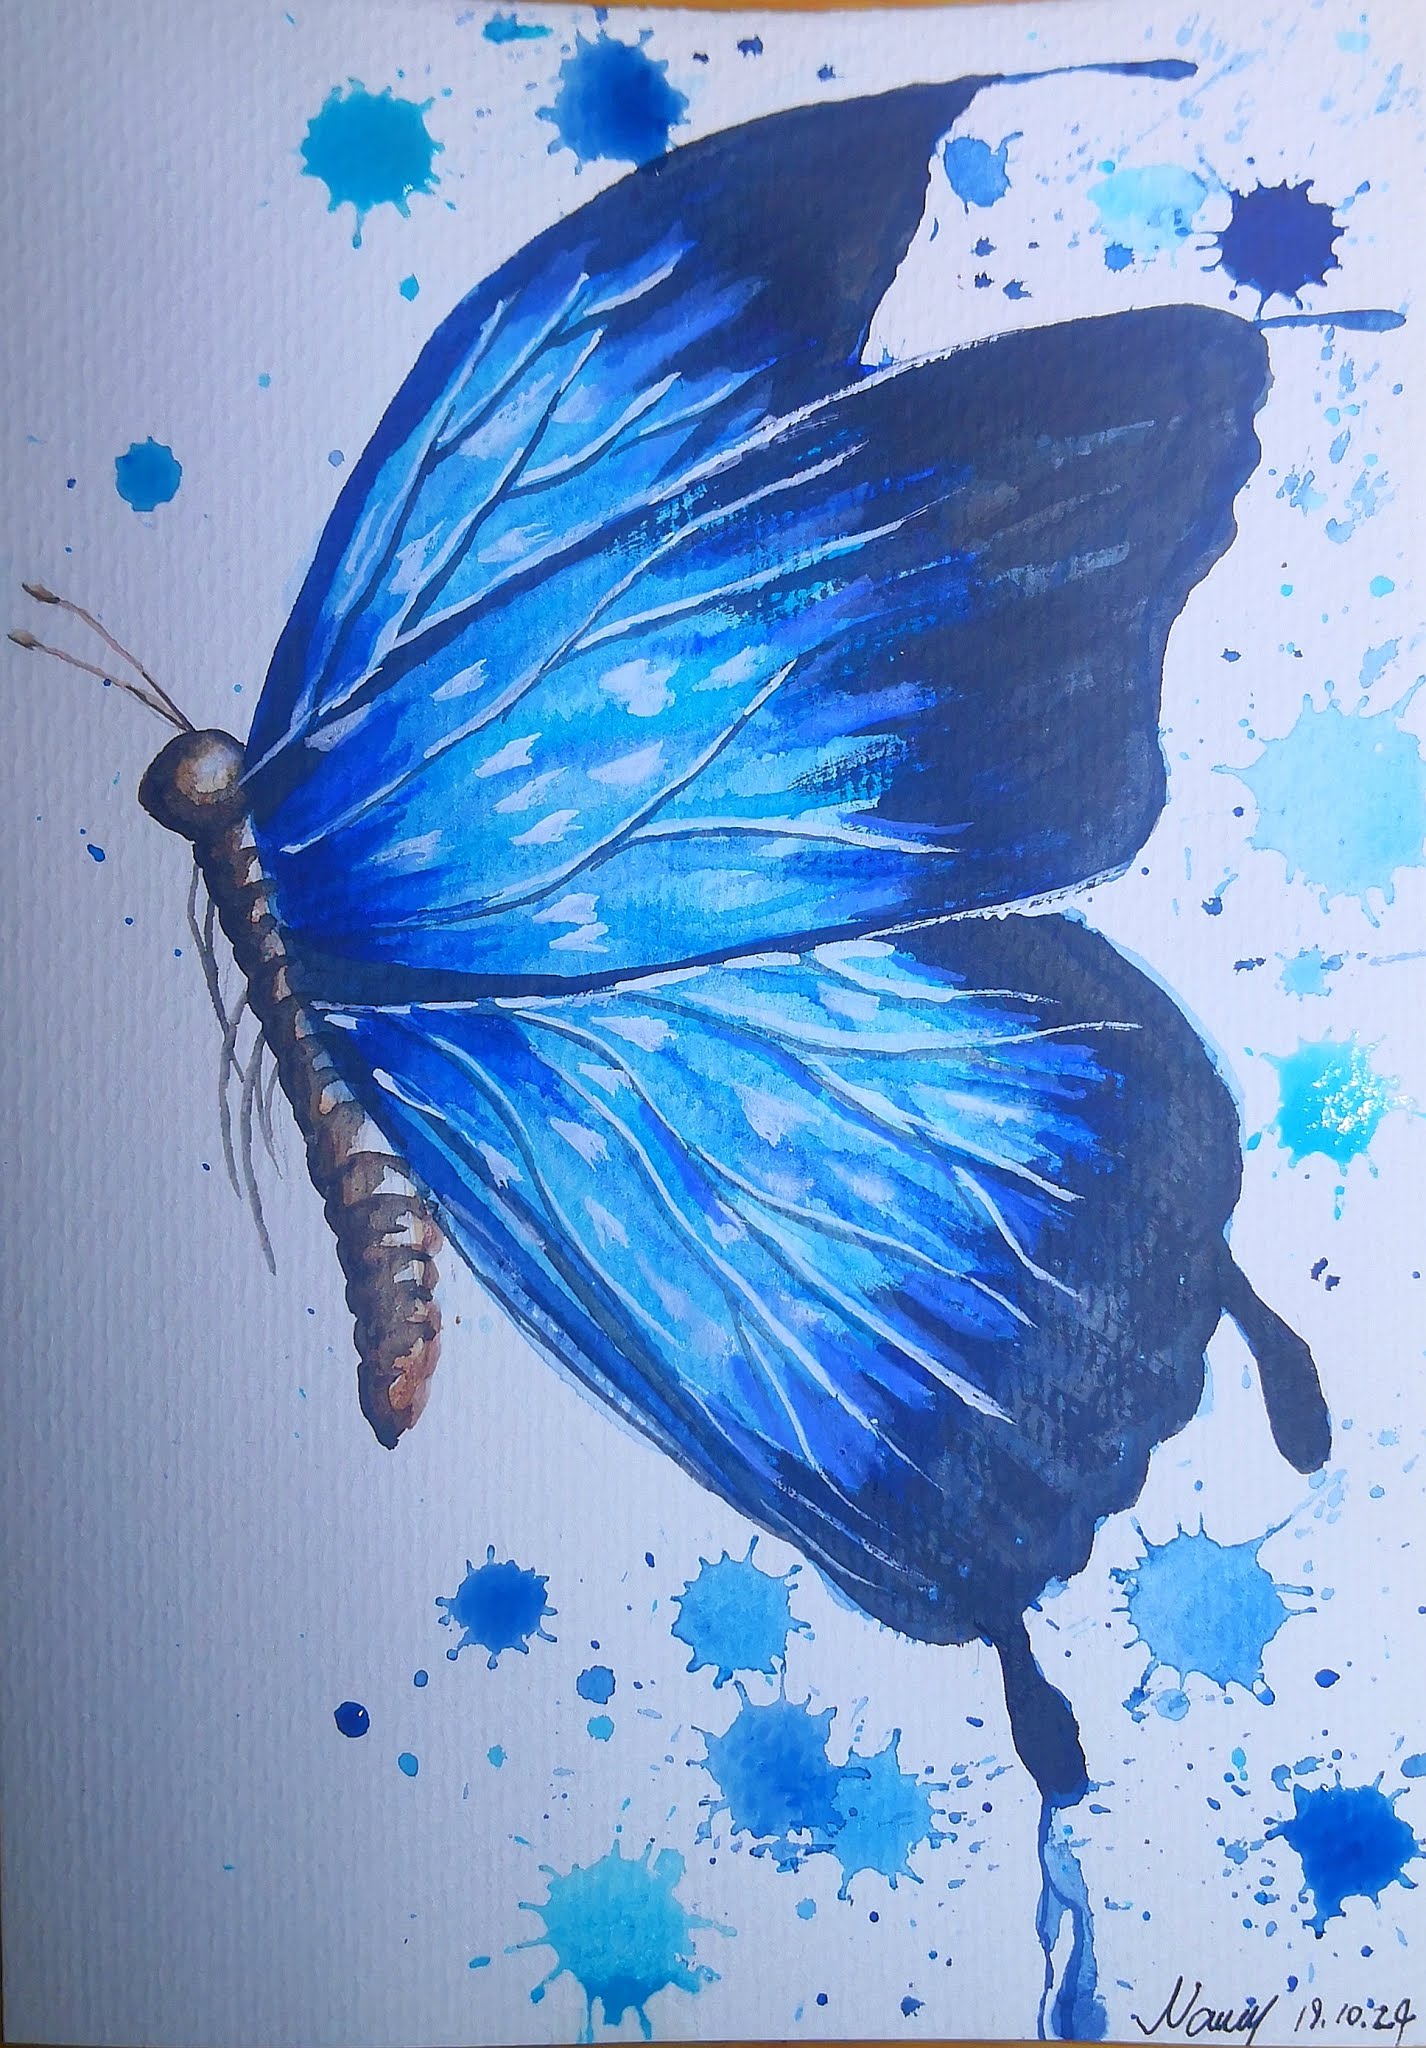 2 How to draw a watercolor butterfly step by step